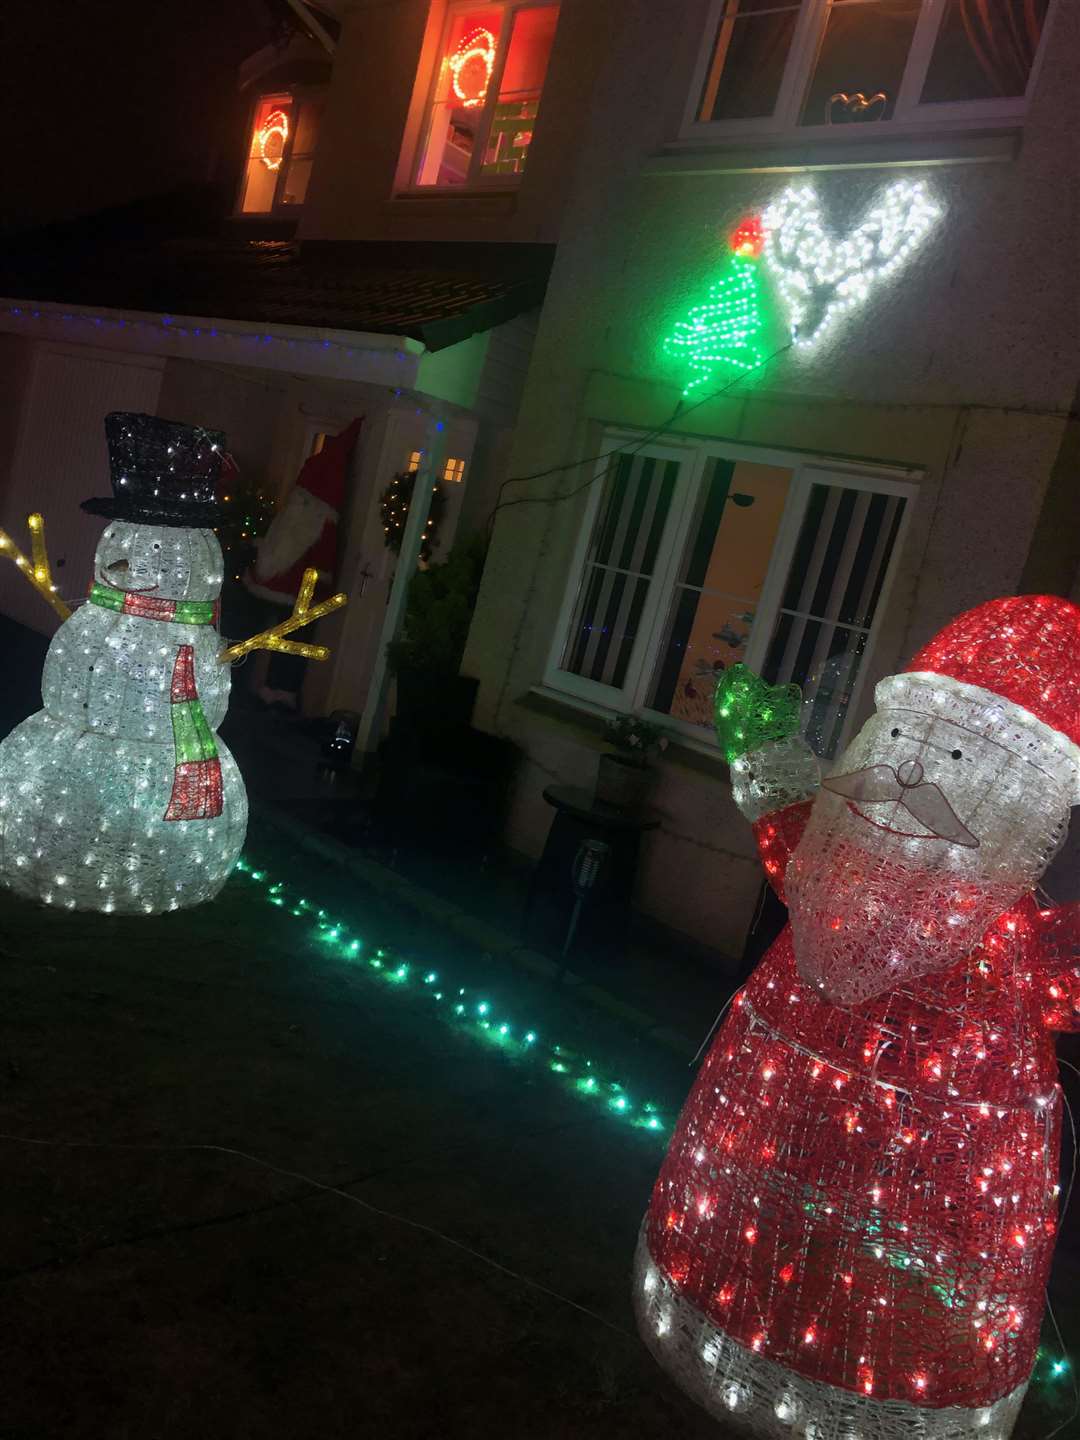 A warm welcome from an illuminated snowman and santa.